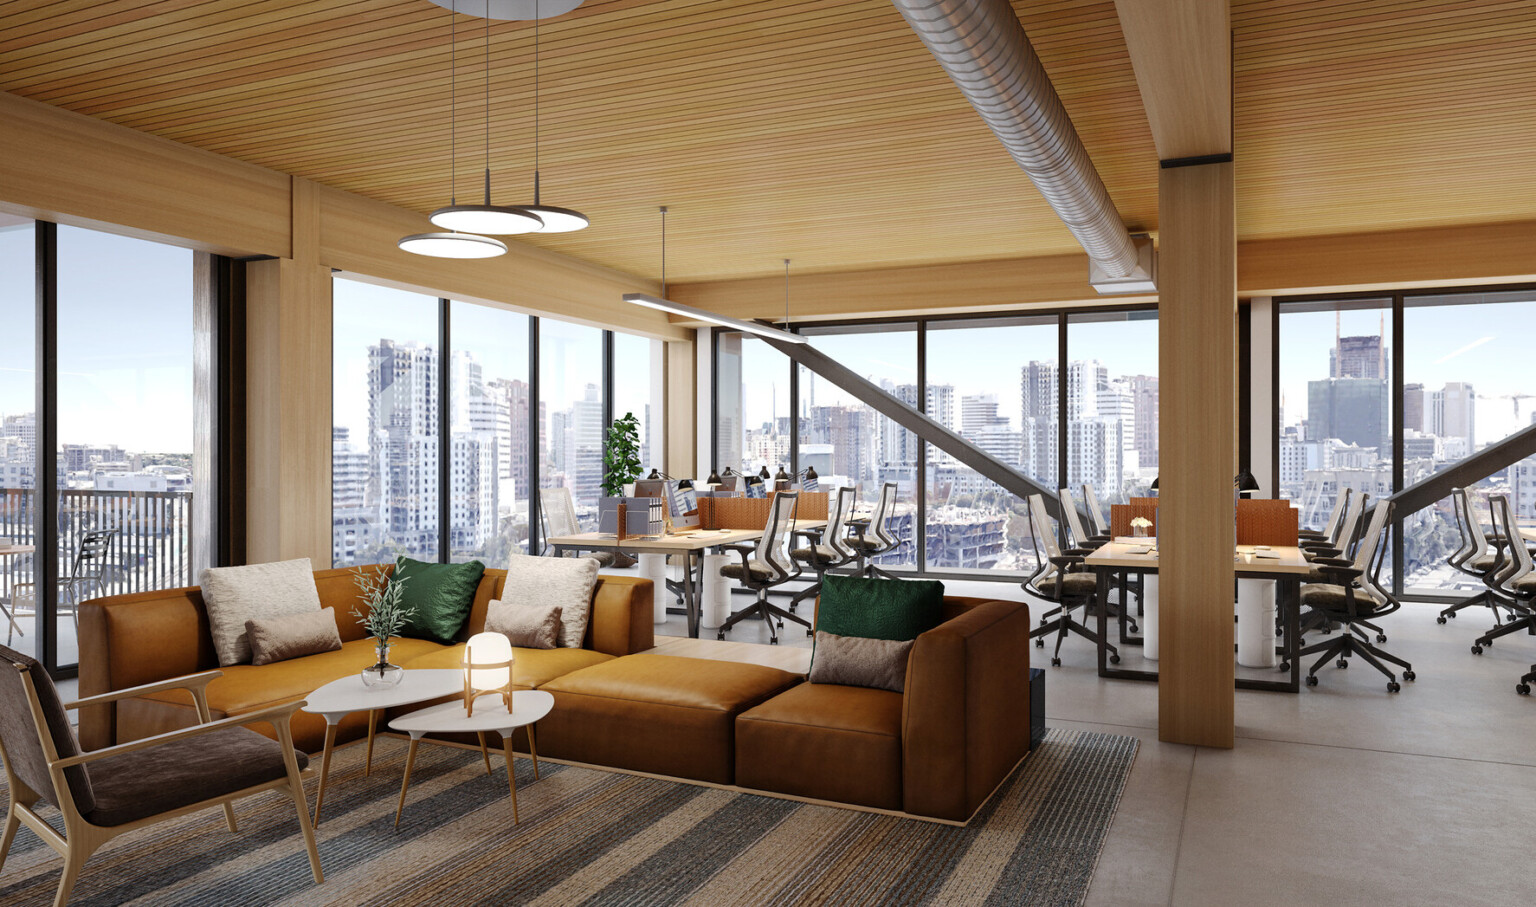 Rendering of the interior of an office space showing a seating area with brown leather couches in from of a desk space with wooden desks with white chairs on wheels